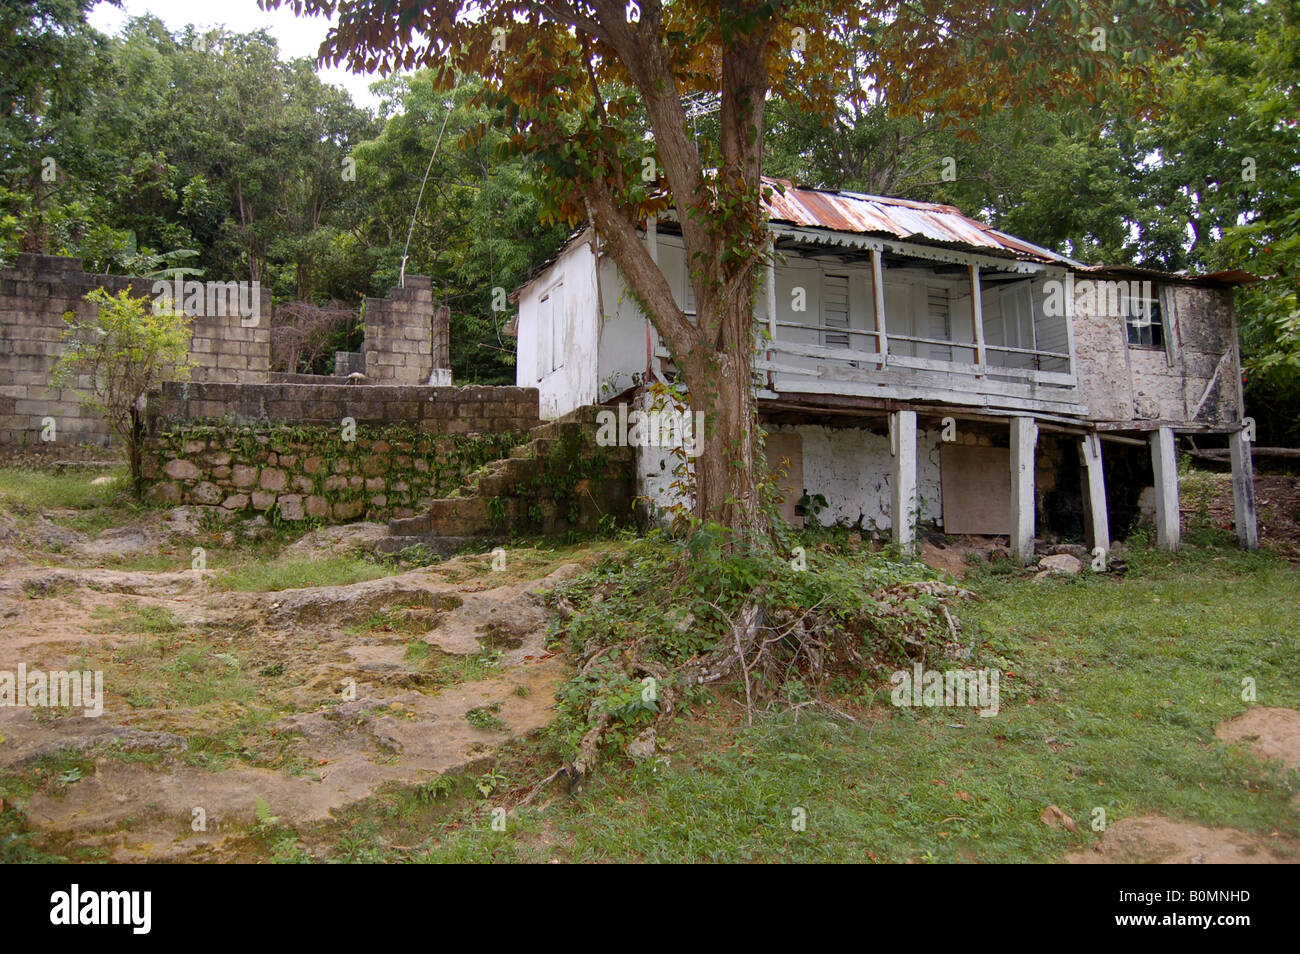 An Old House In Rural Jamaica Stock Photo Alamy